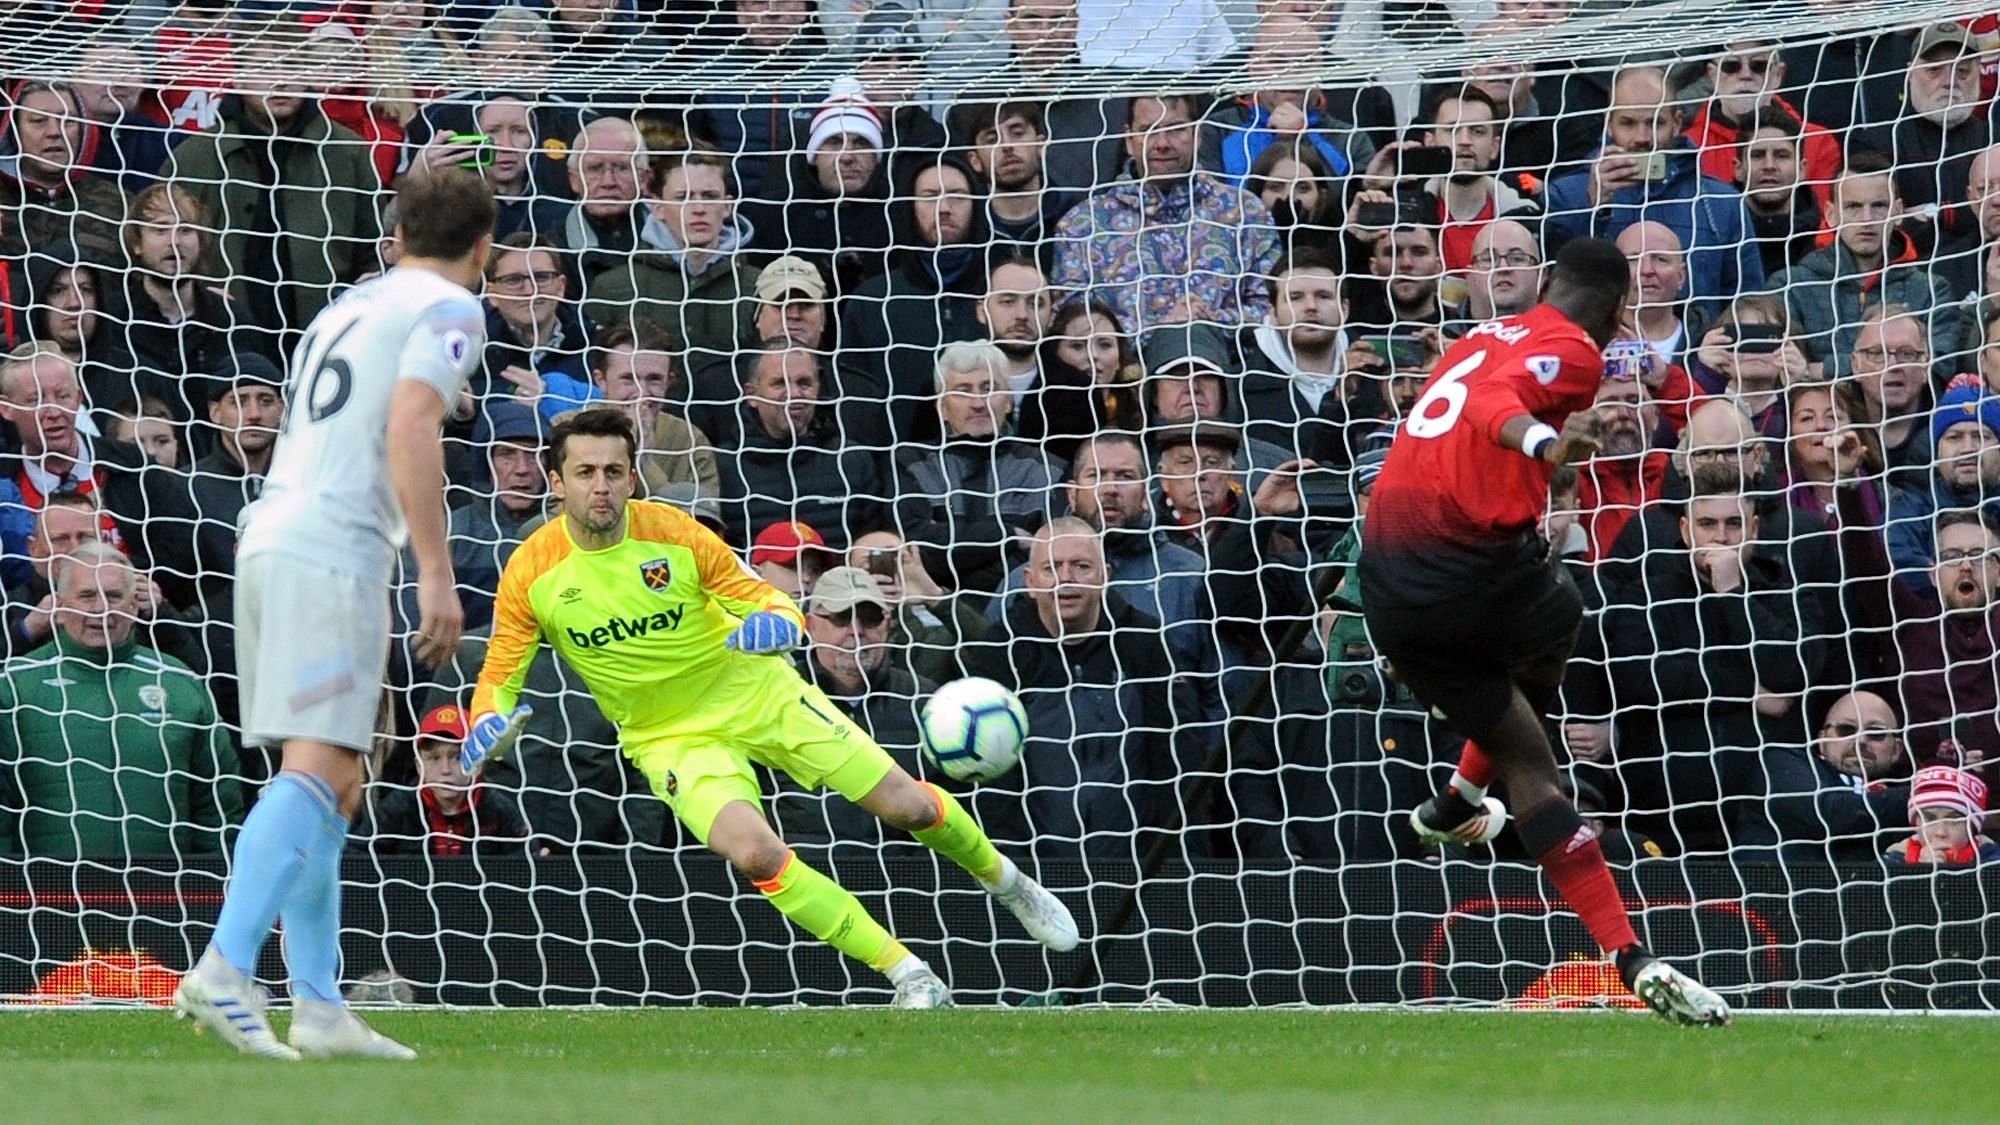 Manchester United’s Paul Pogba scores his side’s second goal from the penalty spot past West Ham goalkeeper Lukasz Fabianski.